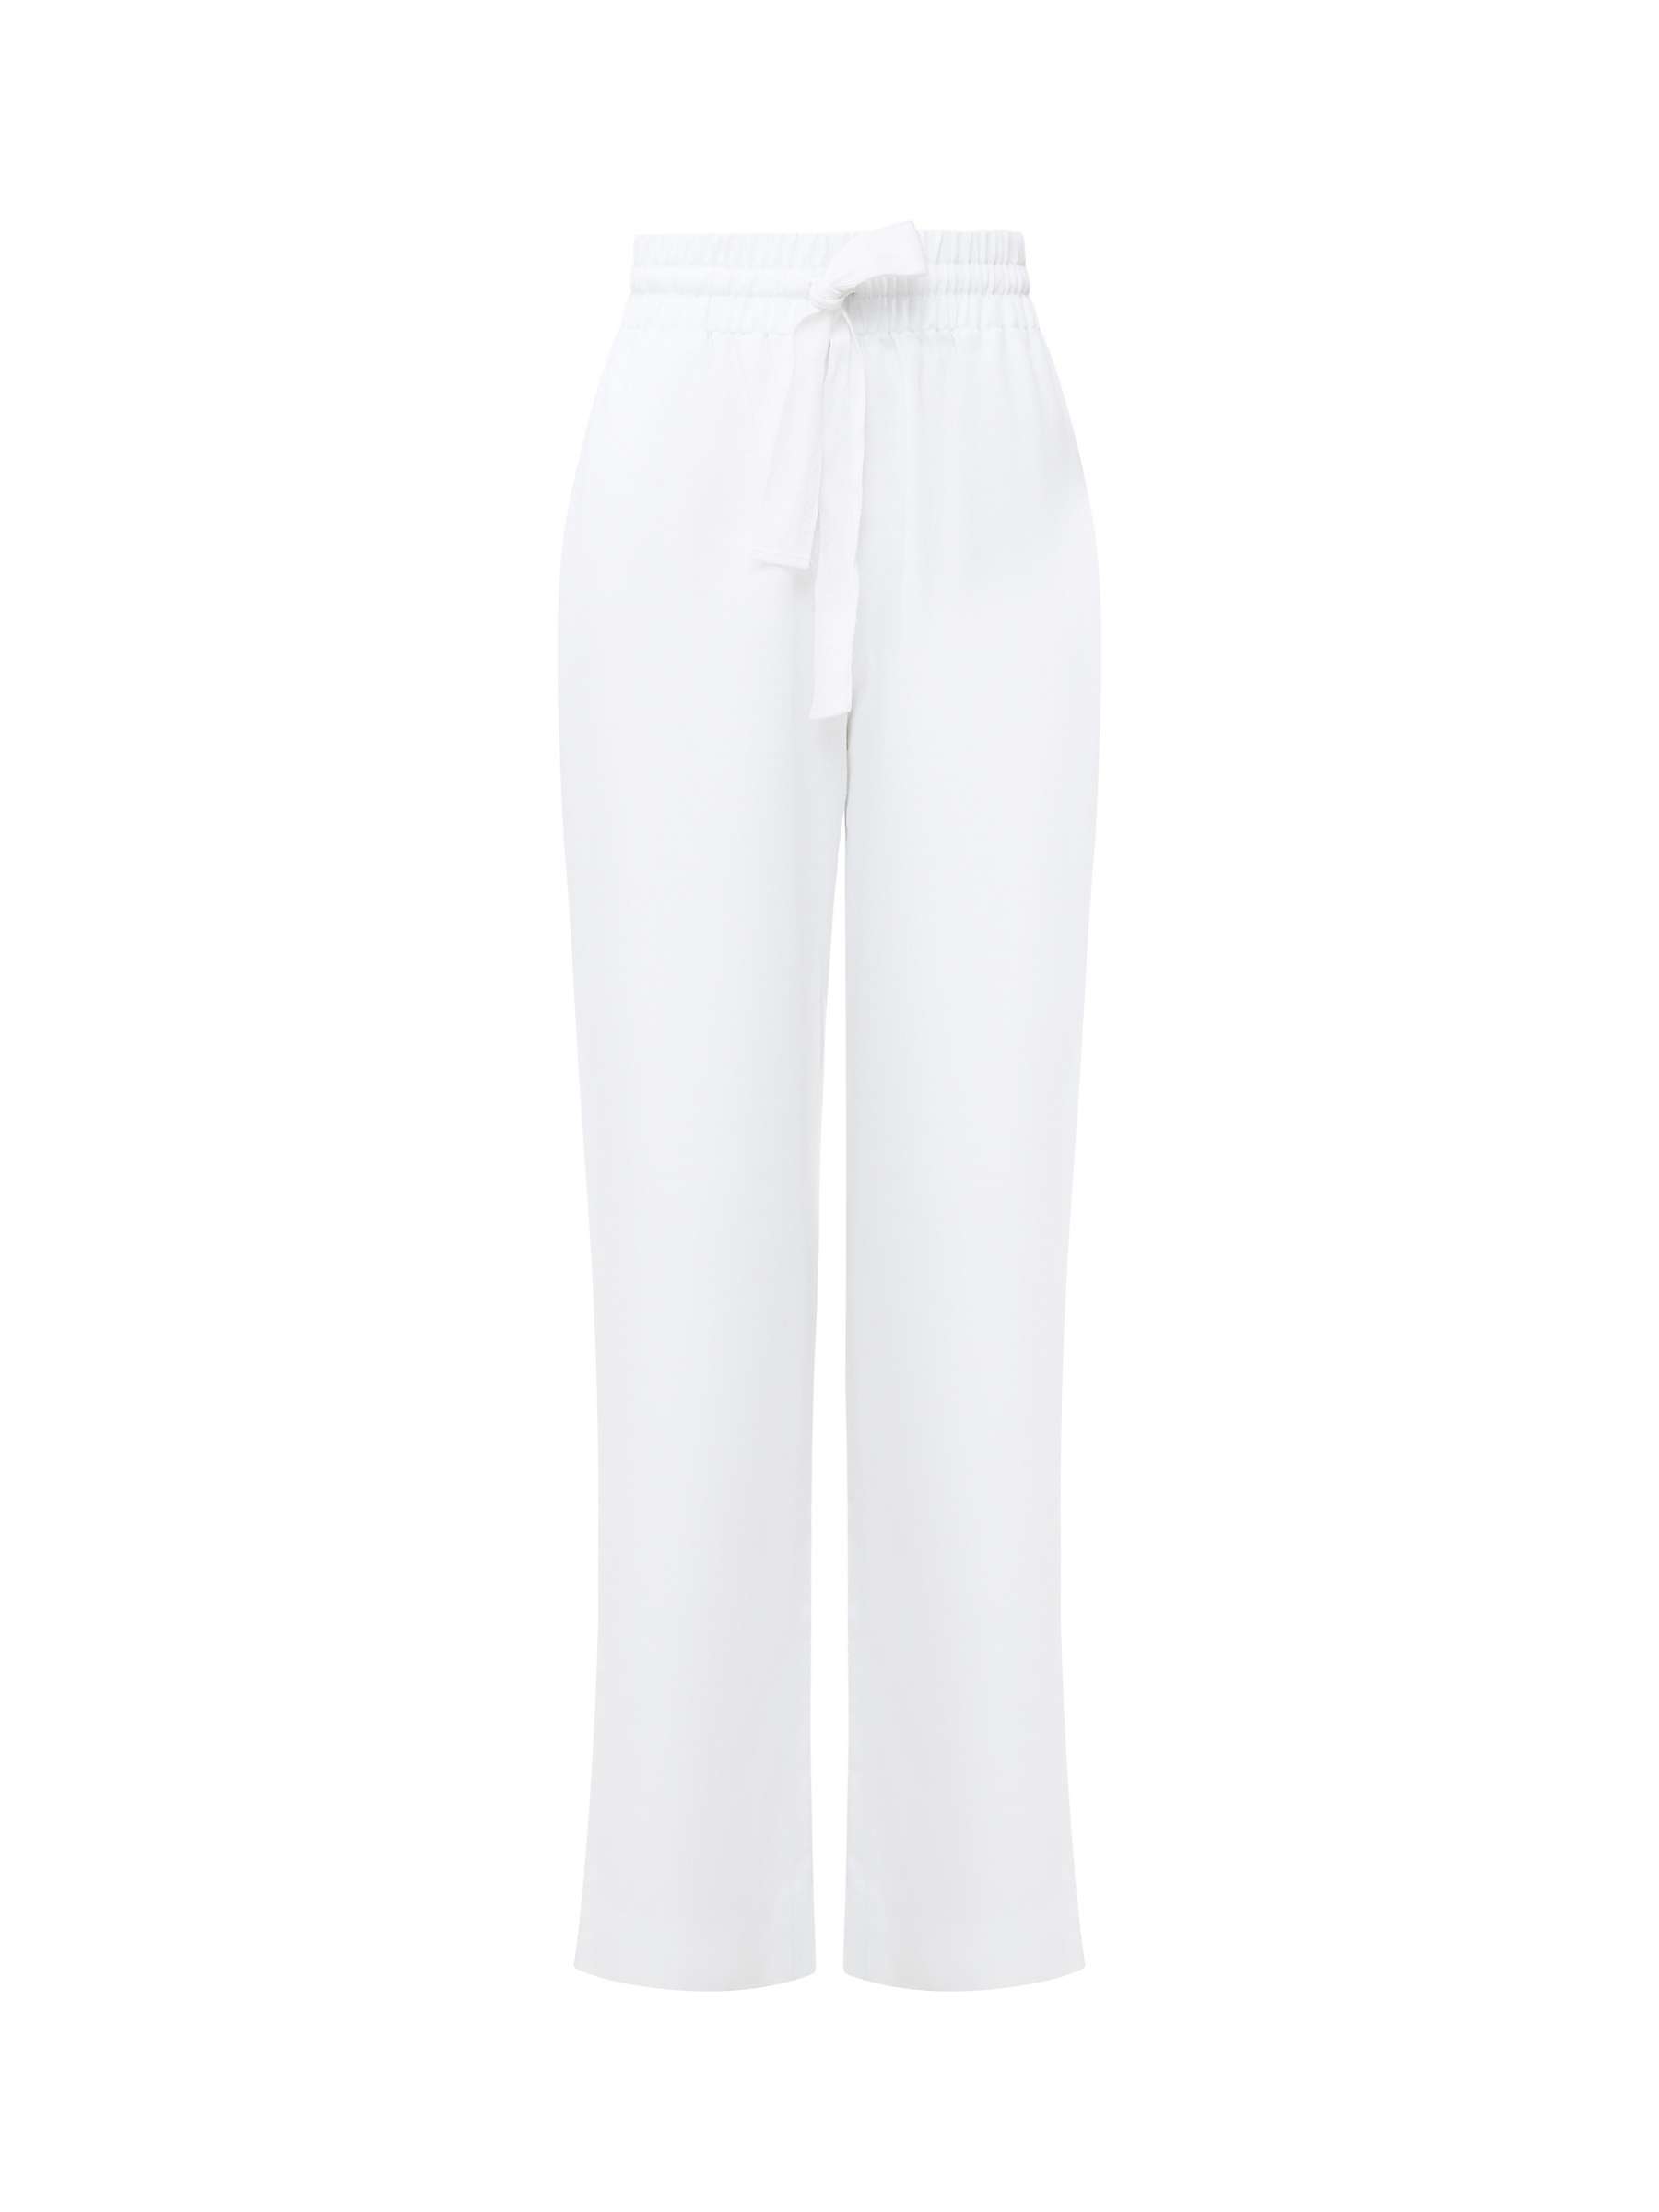 Buy French Connection Bodie Cotton Blend Trousers Online at johnlewis.com